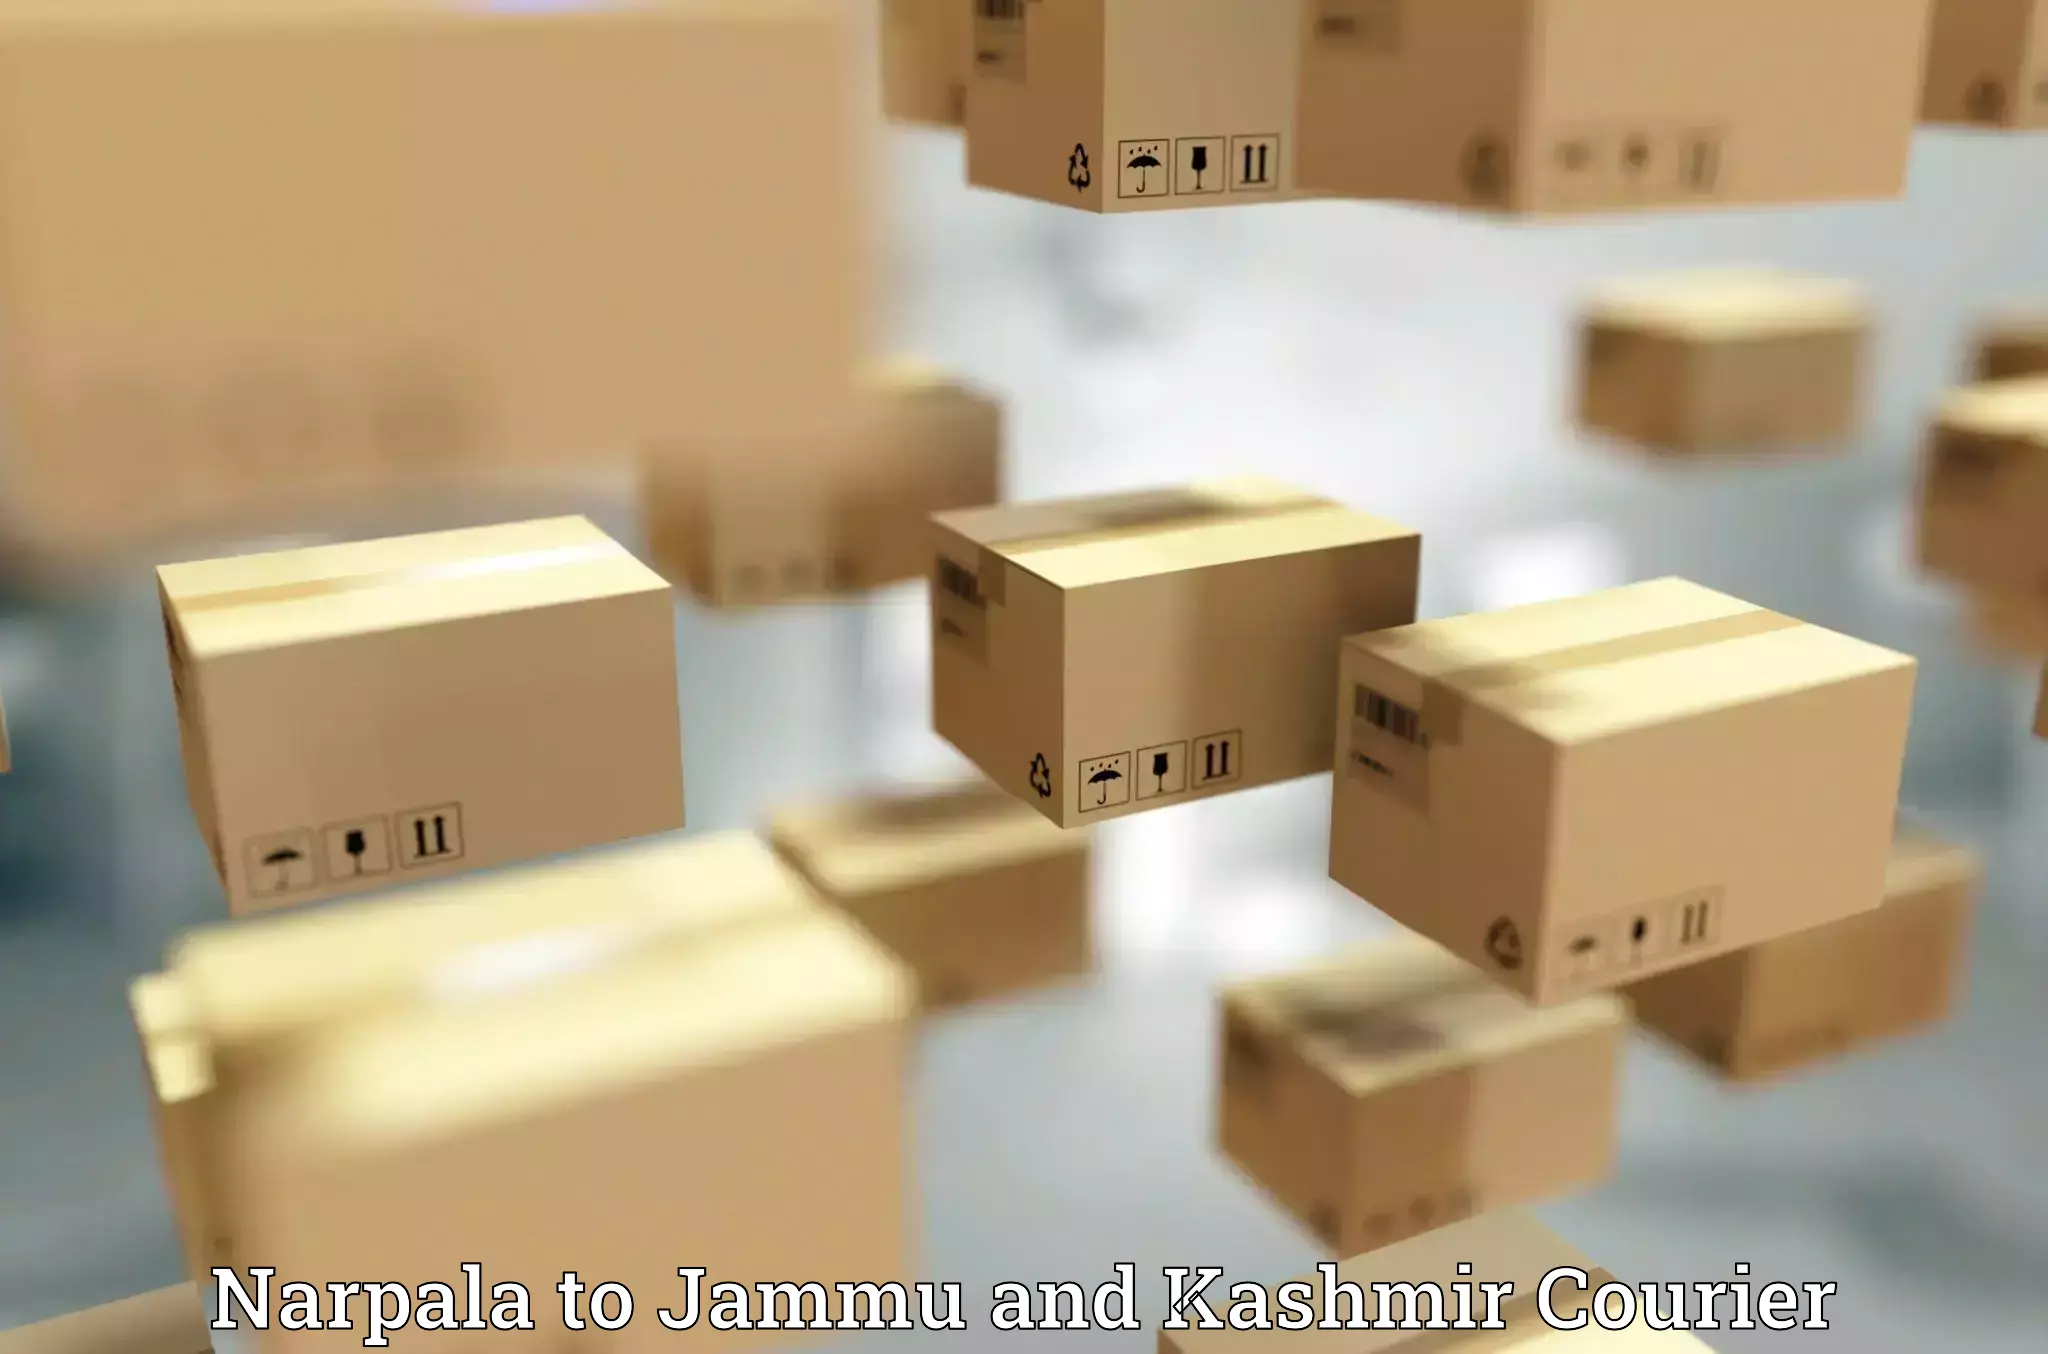 Full-service courier options Narpala to Anantnag